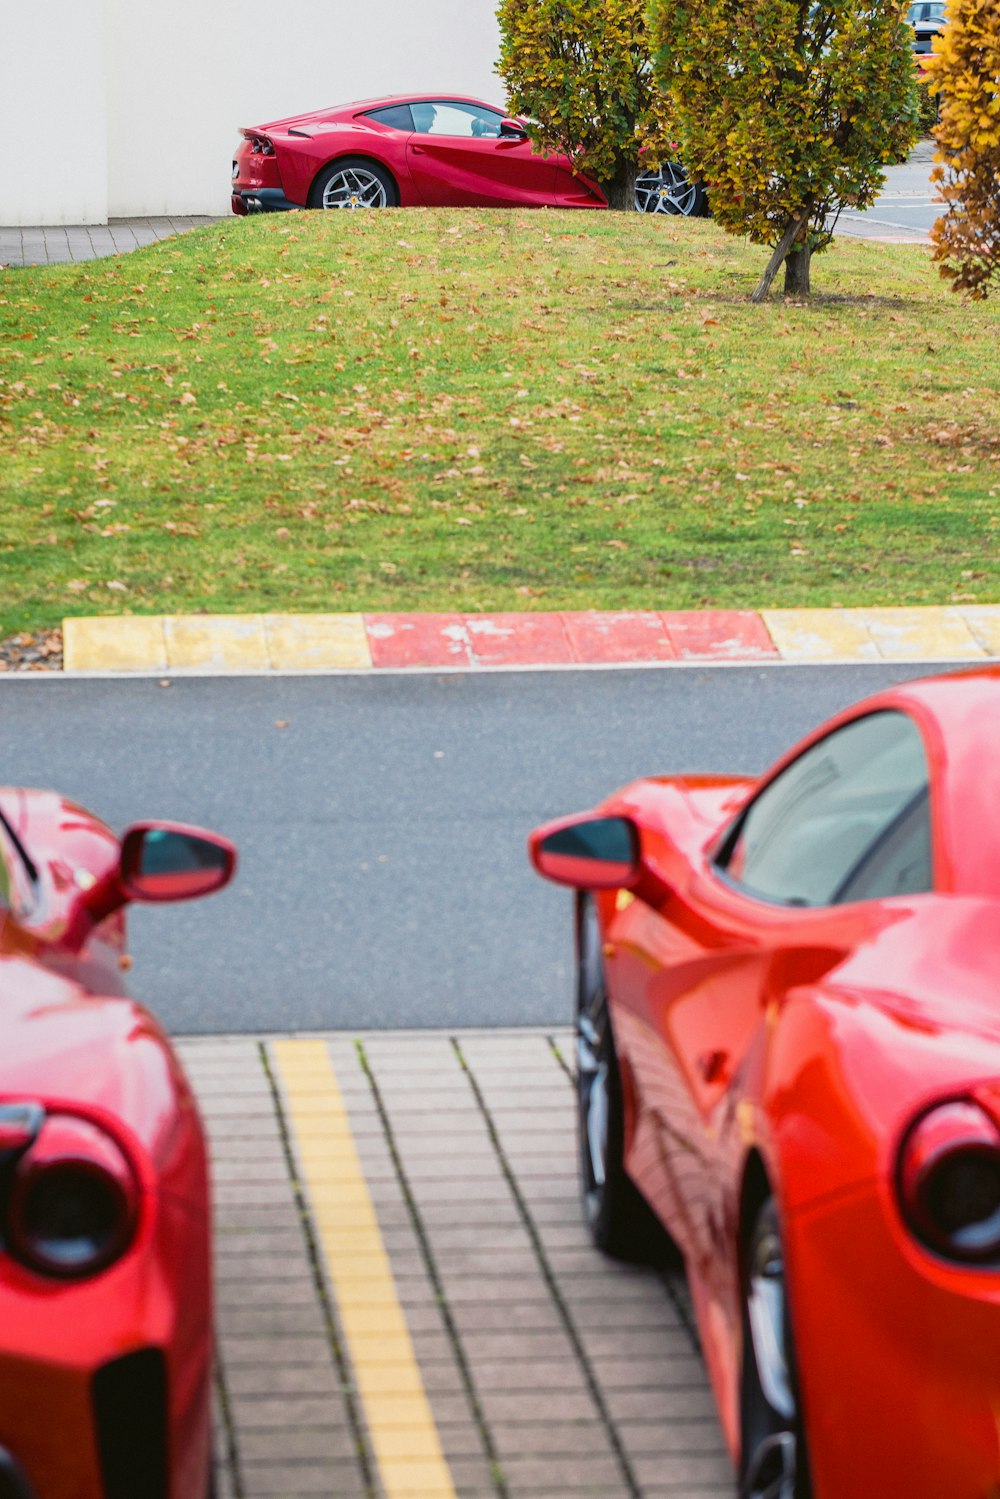 two red sports cars parked next to each other